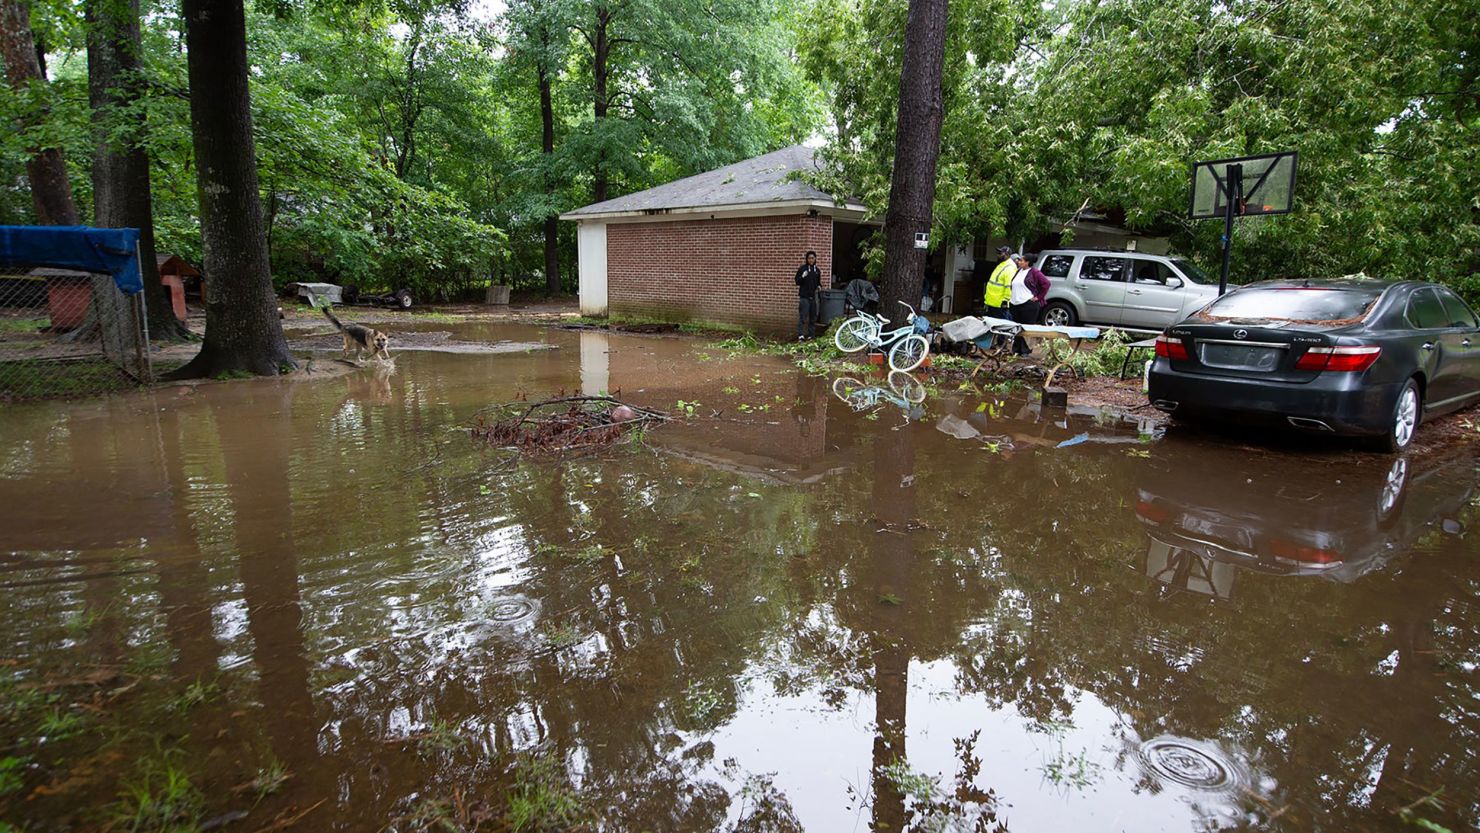 Pregnant woman among multiple people killed due to severe weather in the South